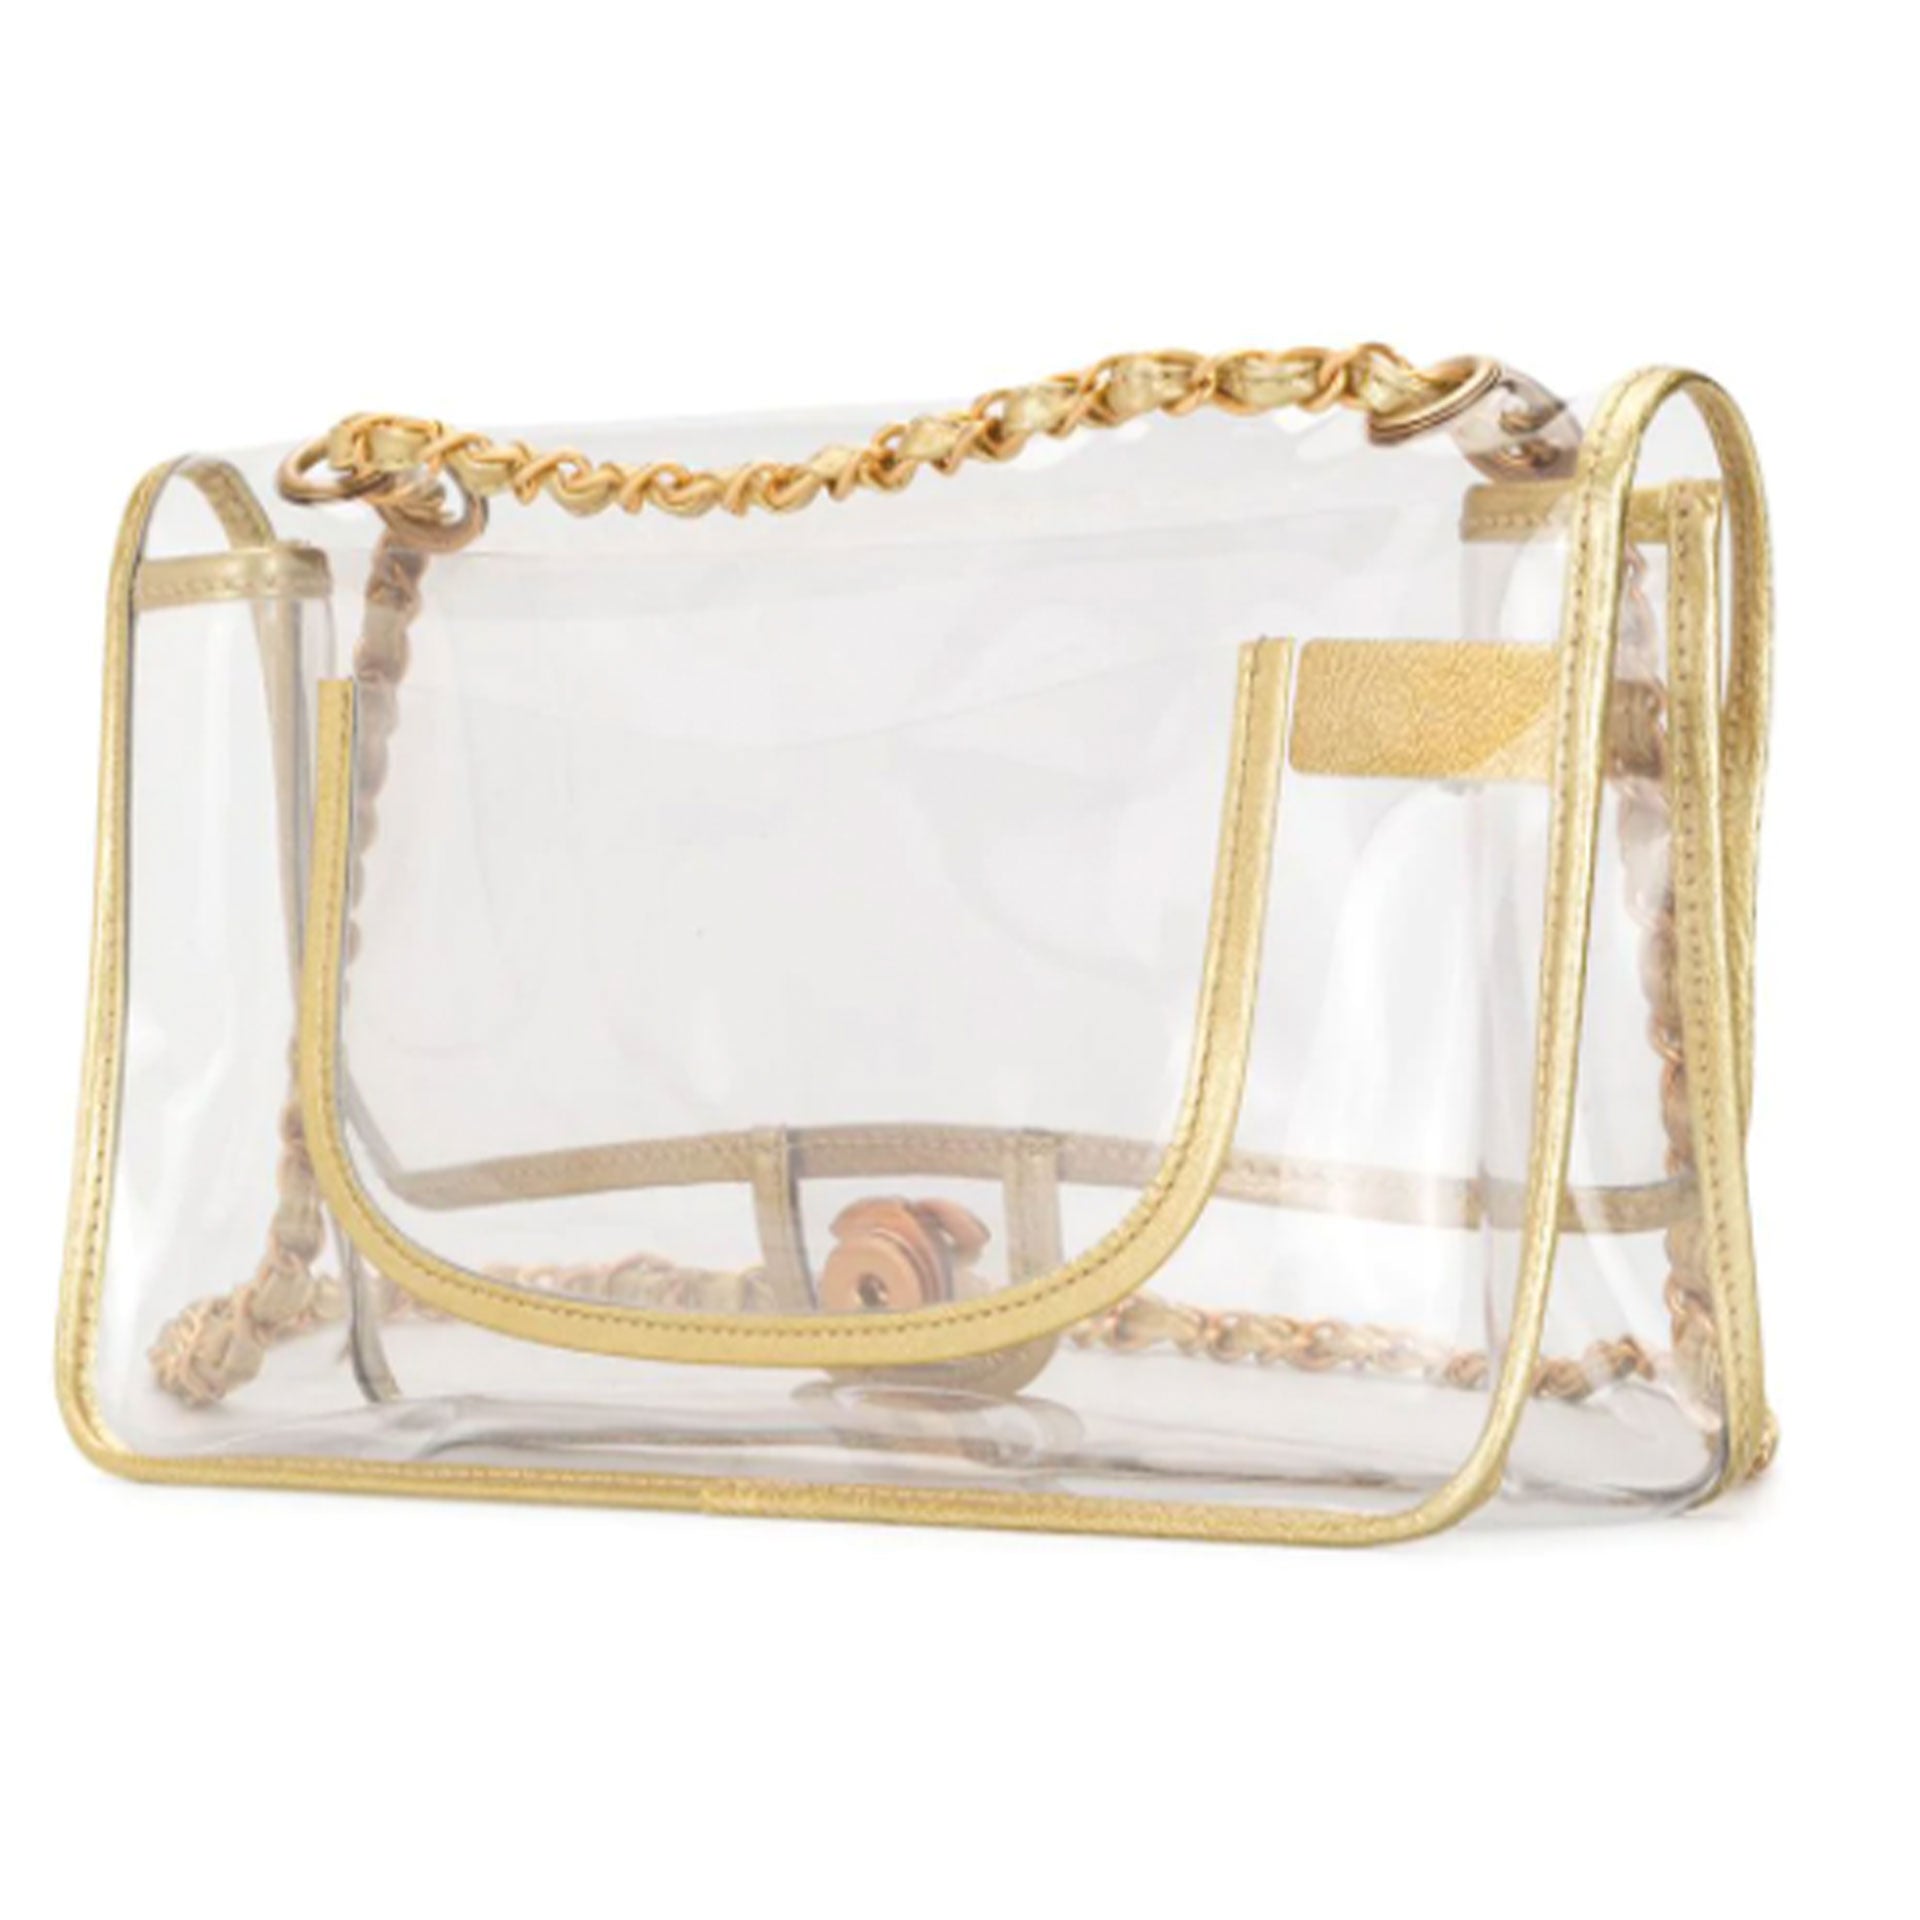 CHANEL, Bags, Brown Transparent Chanel Bag